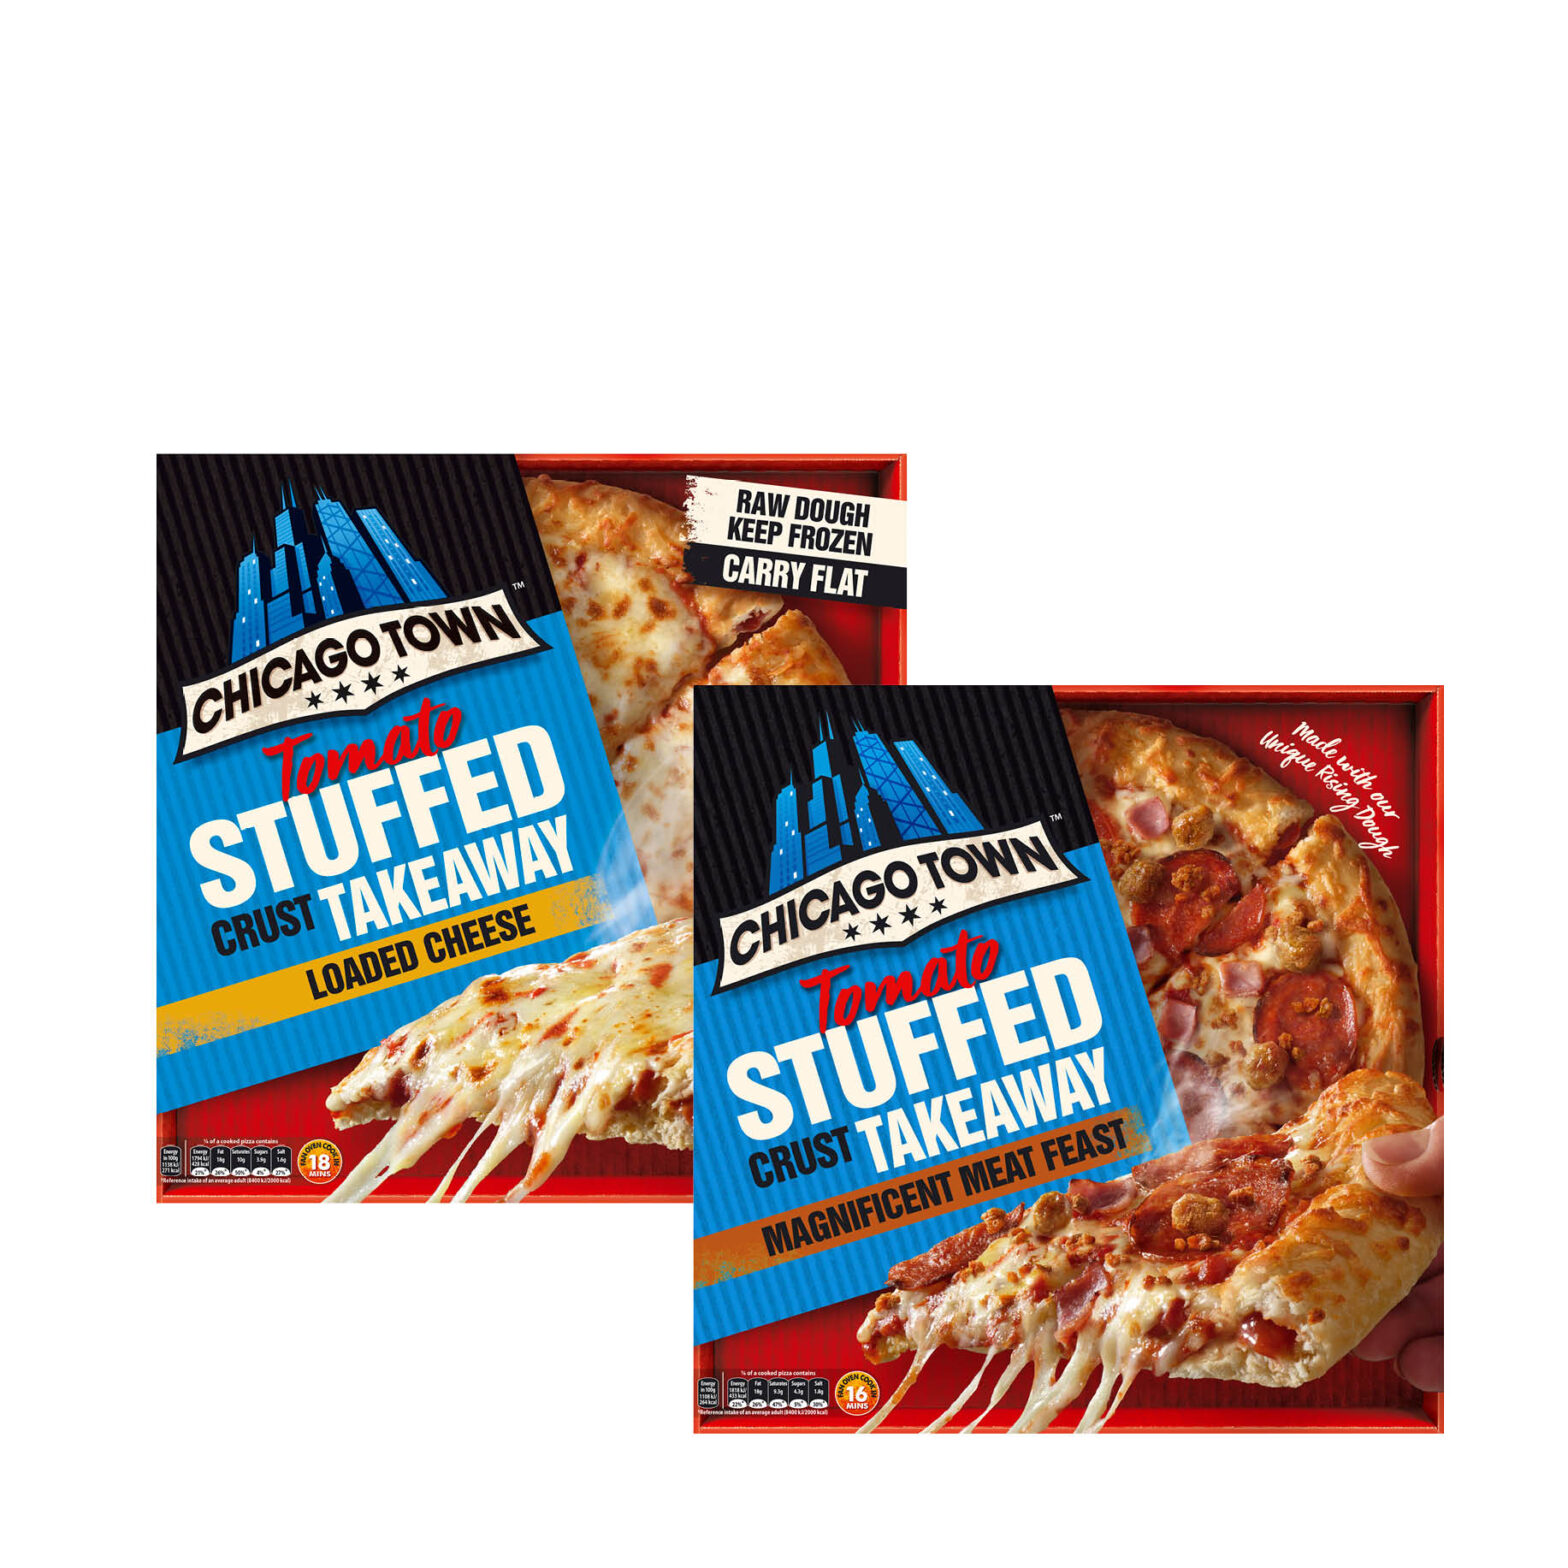 Chicago Town Takeaway Stuffed Crust Cheese / Chicago Town Takeaway Stuffed Crust Meat Feast